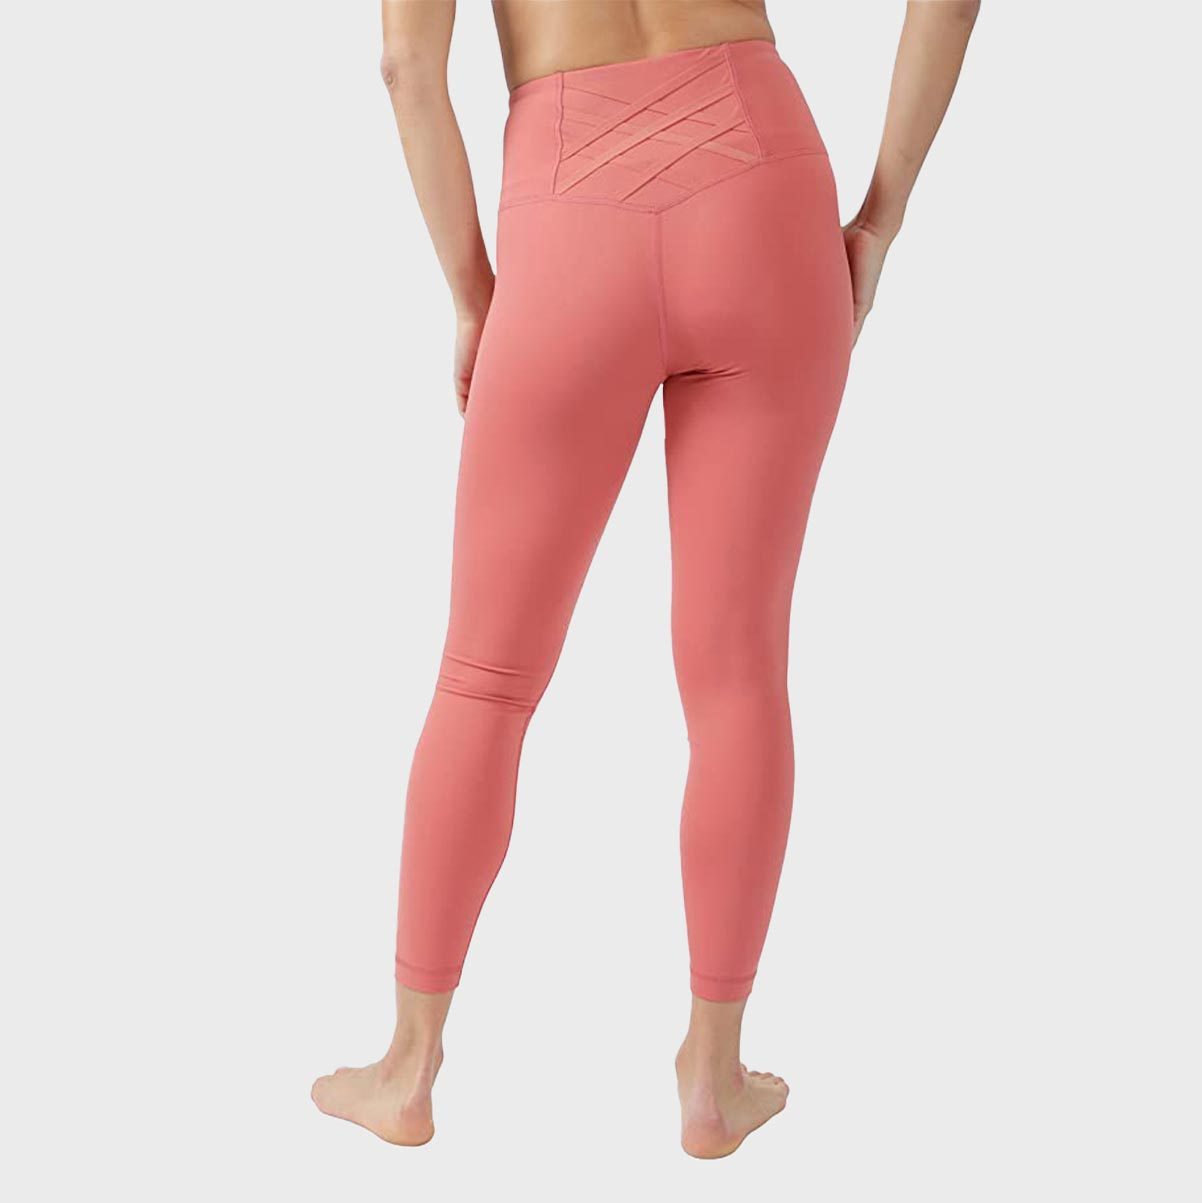 Leggings that go deep INTO the butt crack like these from